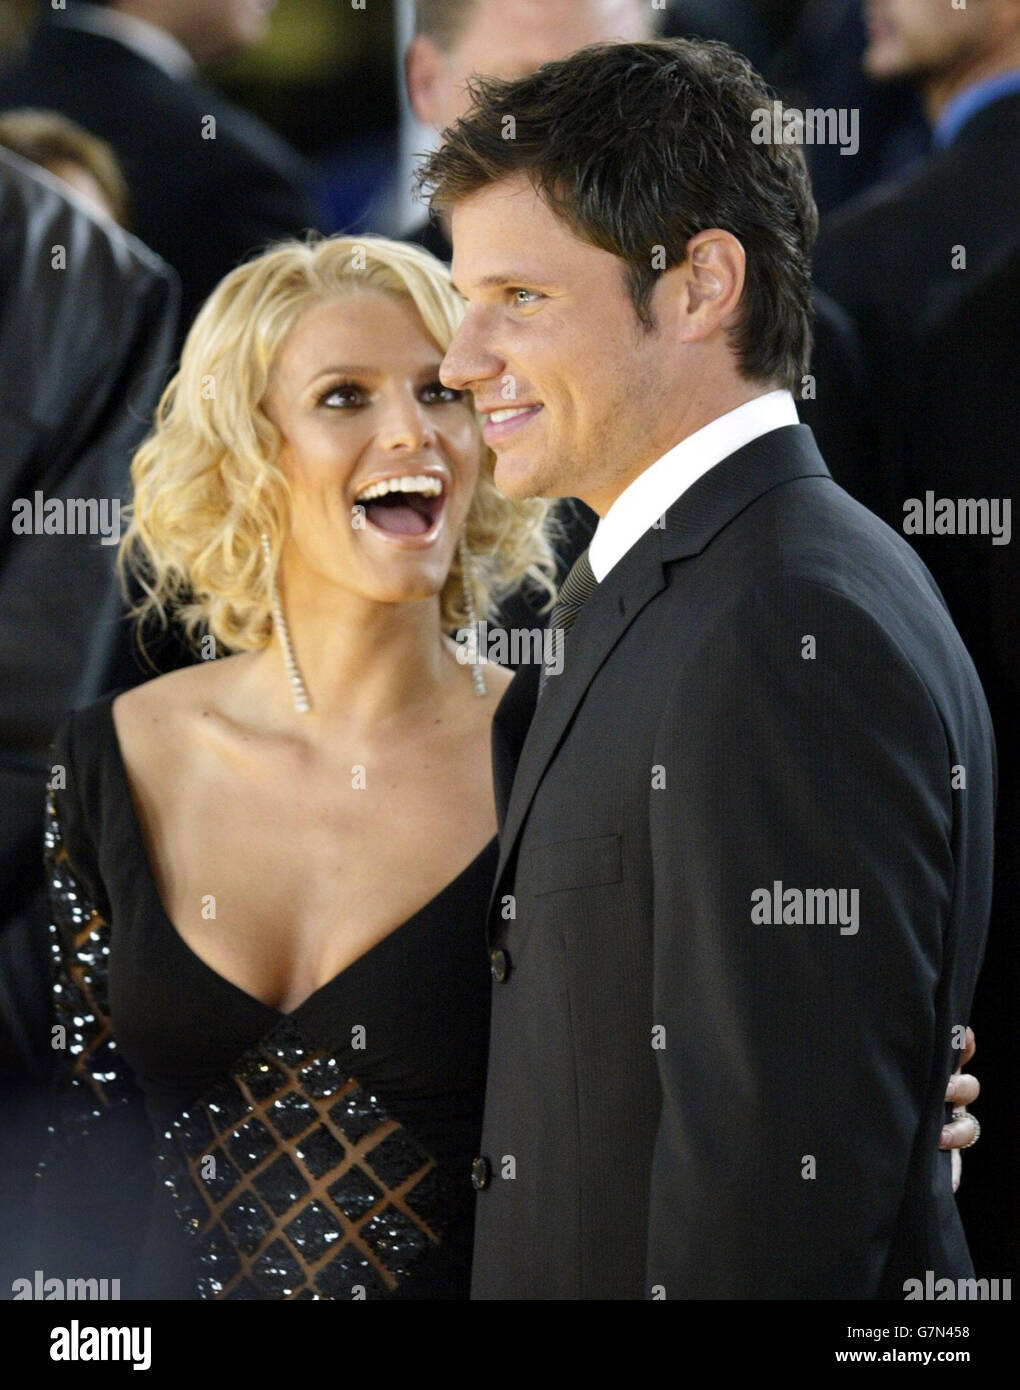 Singer JESSICA SIMPSON & Singer NICK LACHEY at the Rodeo Drive Walk Of Style  Award held on Rodeo Drive Stock Photo - Alamy